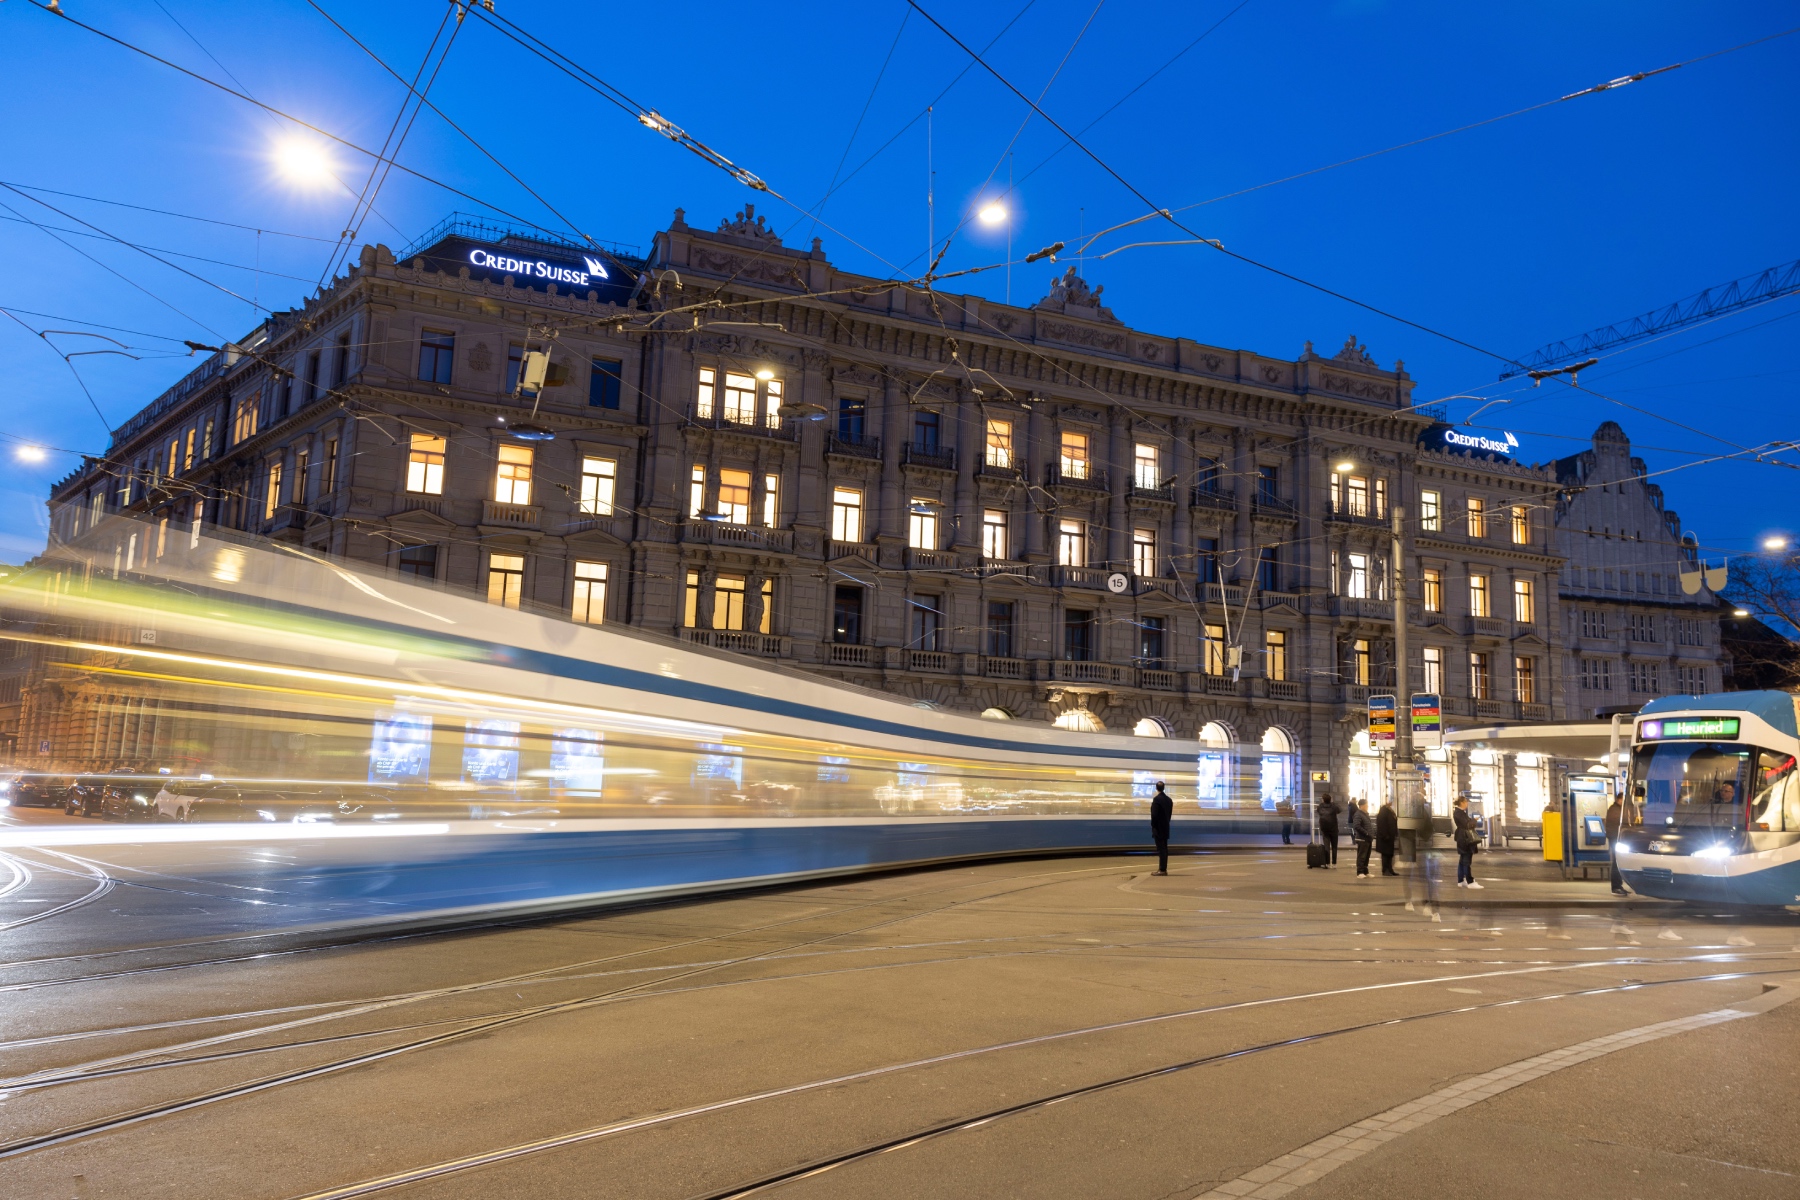 A zooming tram passes by Credit Suisse headquarters in Zürich